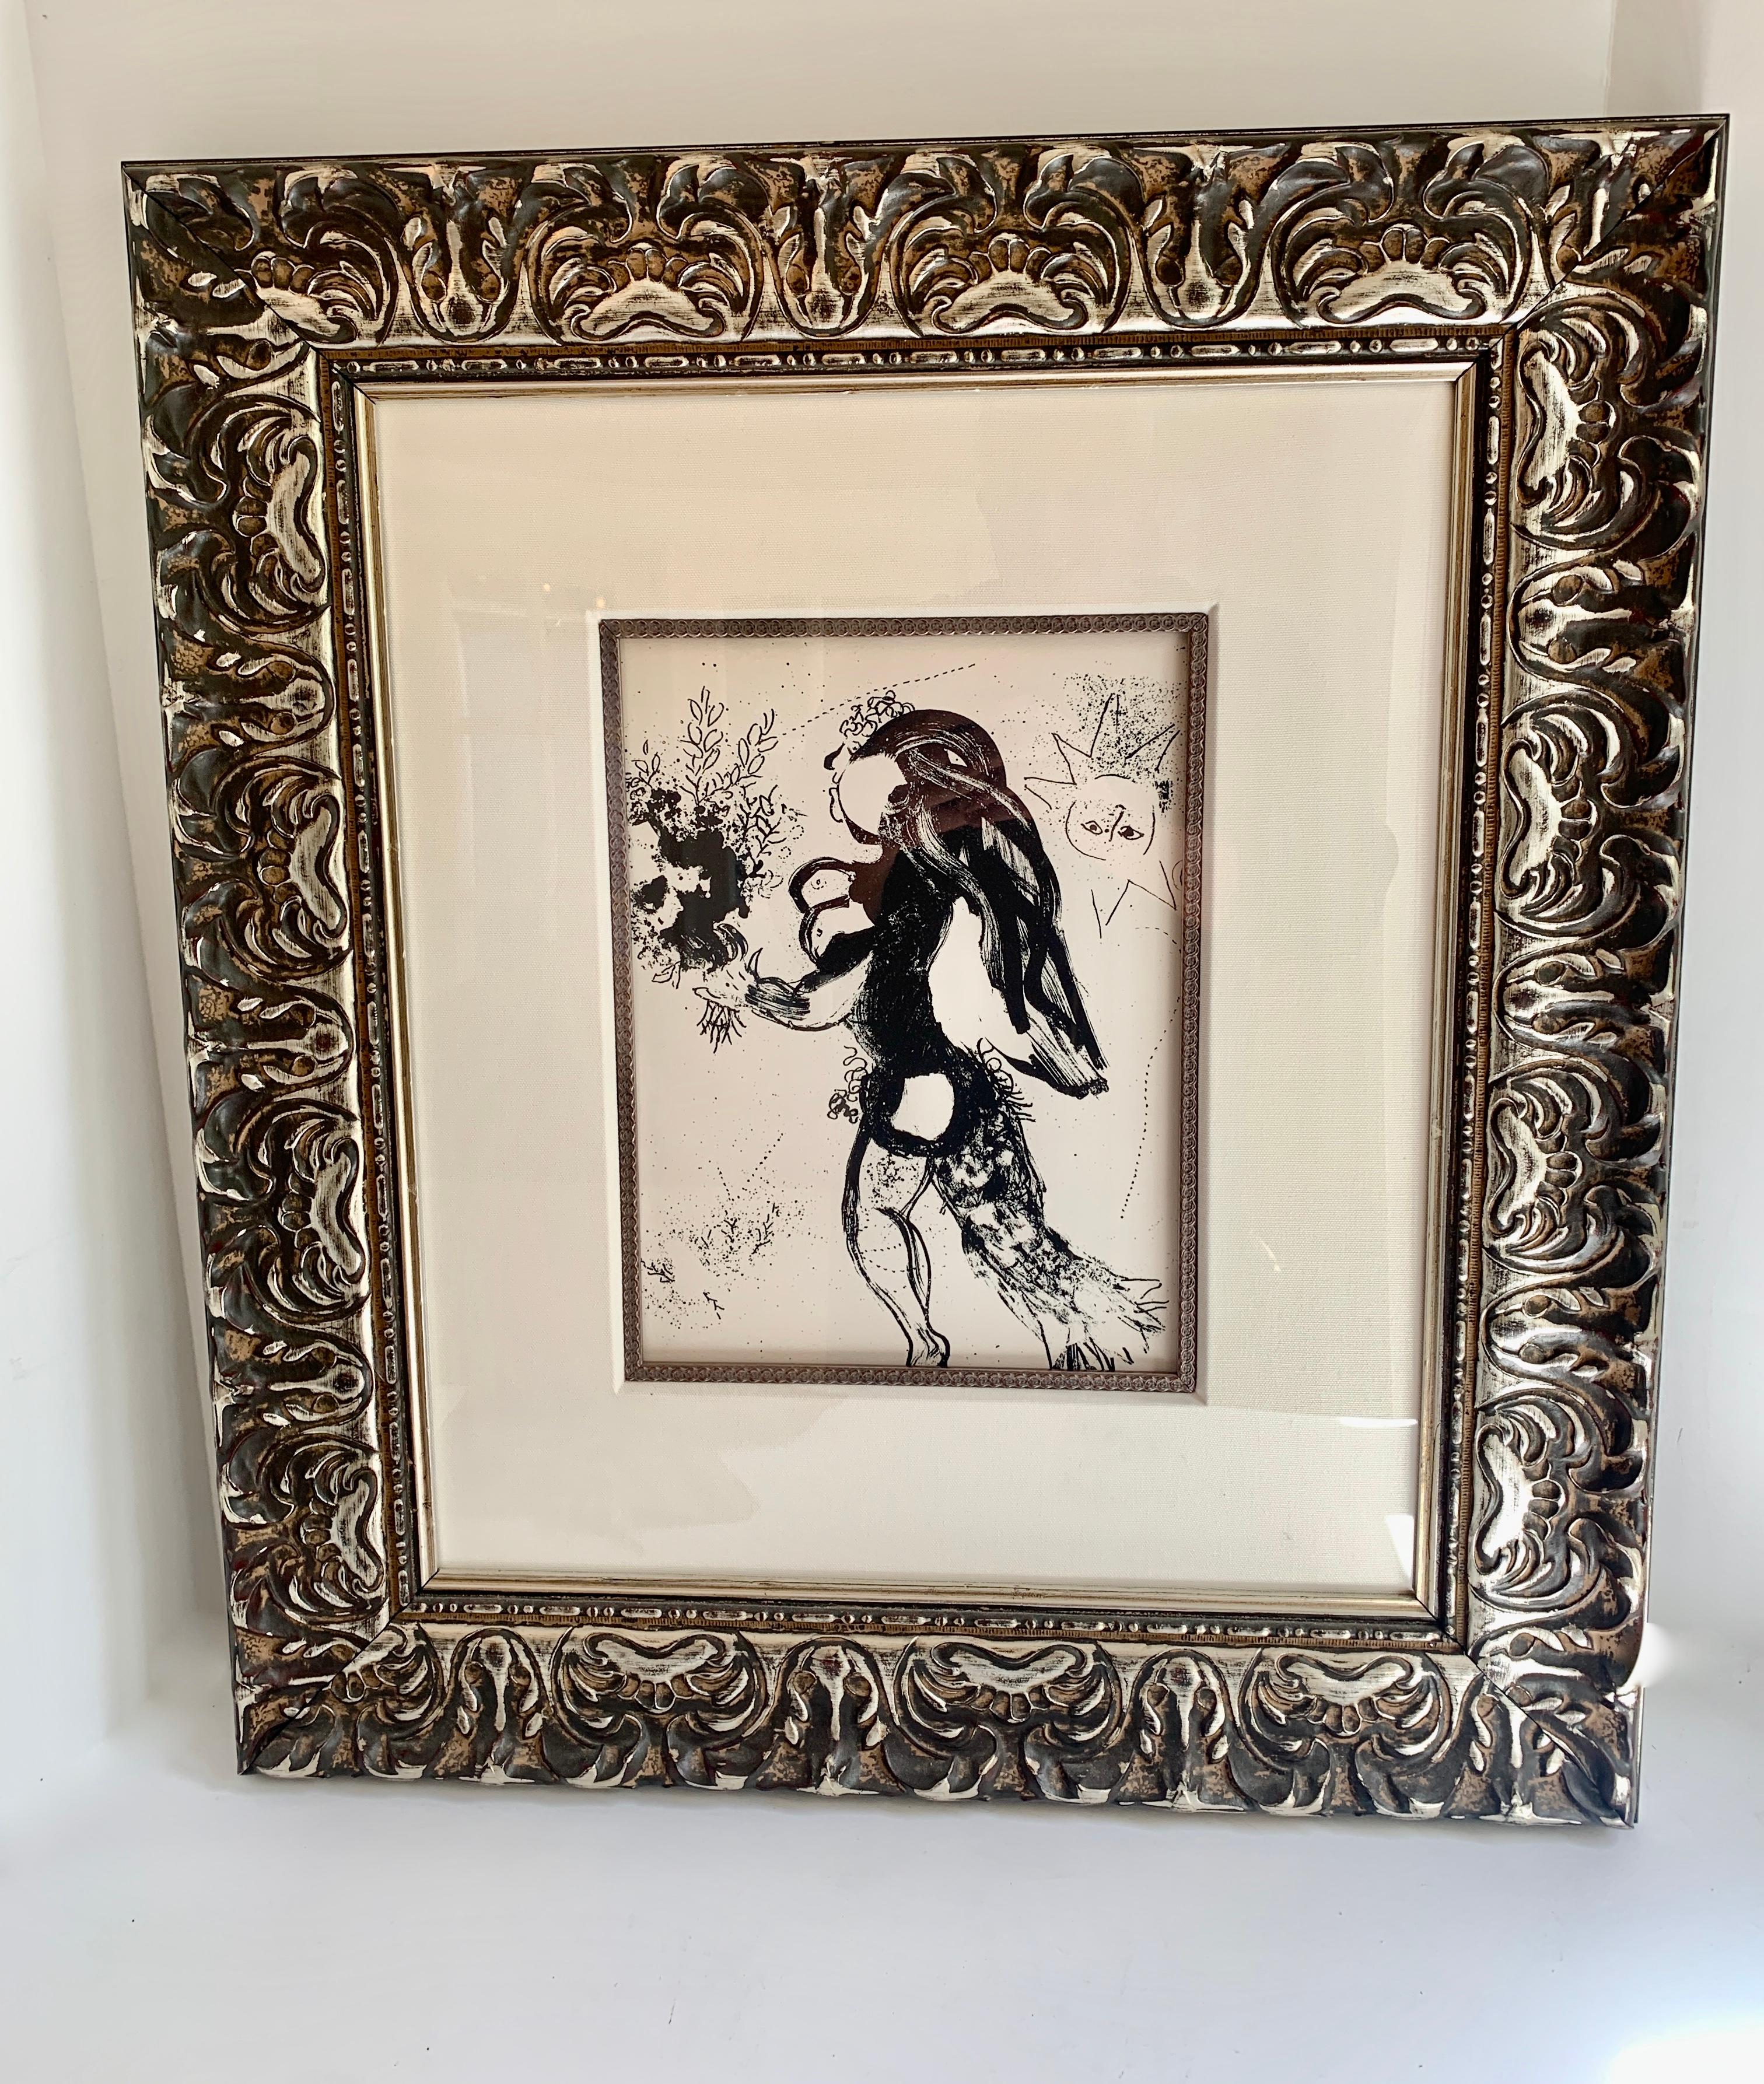 Framed Lithograph in black and white by artist, Marc Chagall, titled 